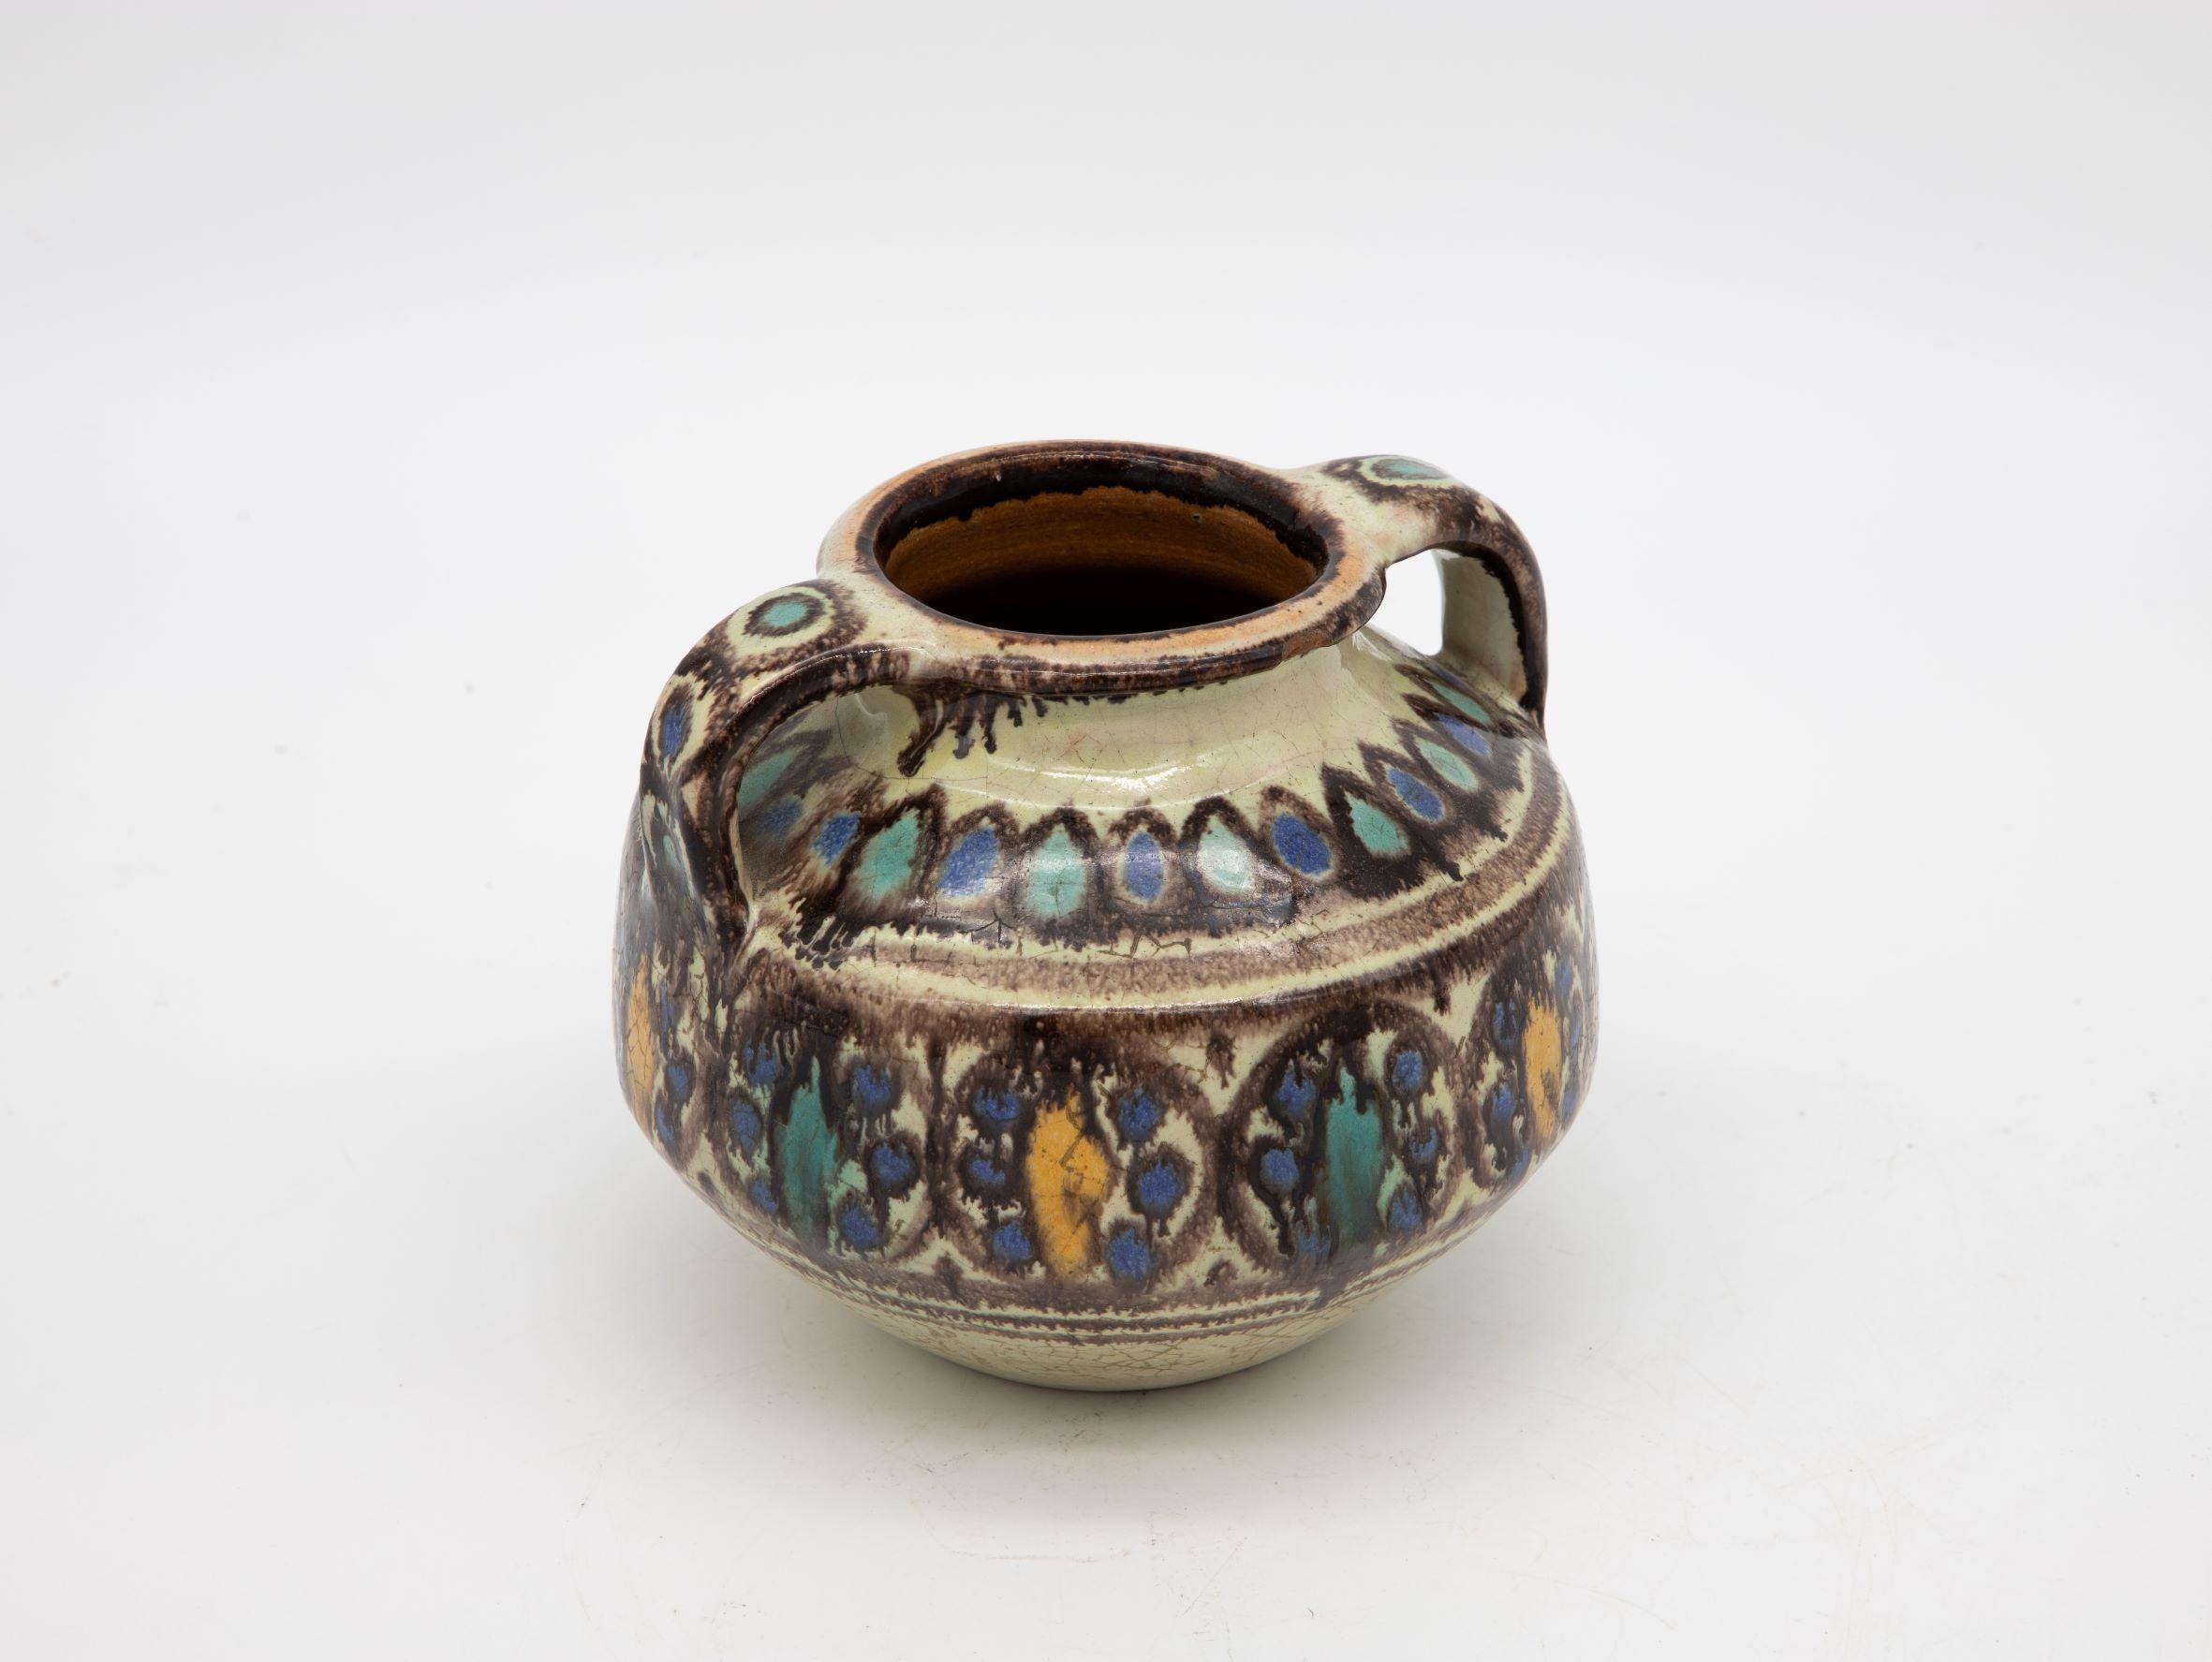 A two-handled vase from Safi, Morocco. Early 20th century. Alternating aqua and yellow
leaf pattern.